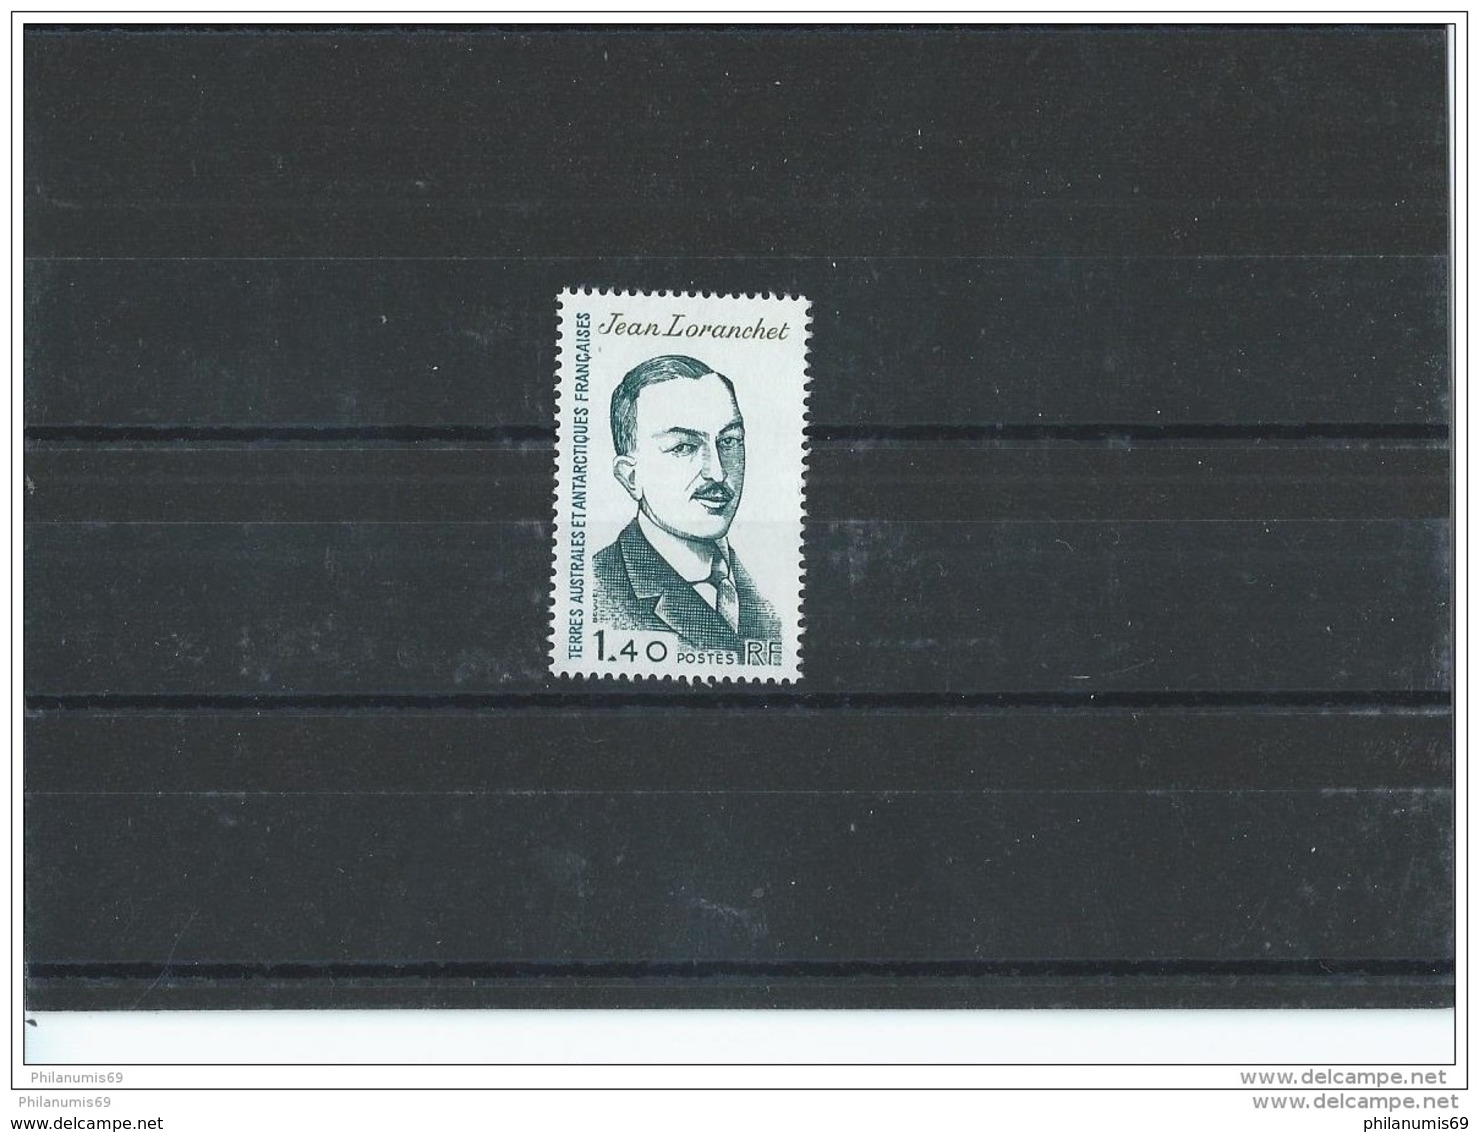 TAAF 1981 - YT N° 94 NEUF SANS CHARNIERE ** (MNH) GOMME D'ORIGINE LUXE - Neufs